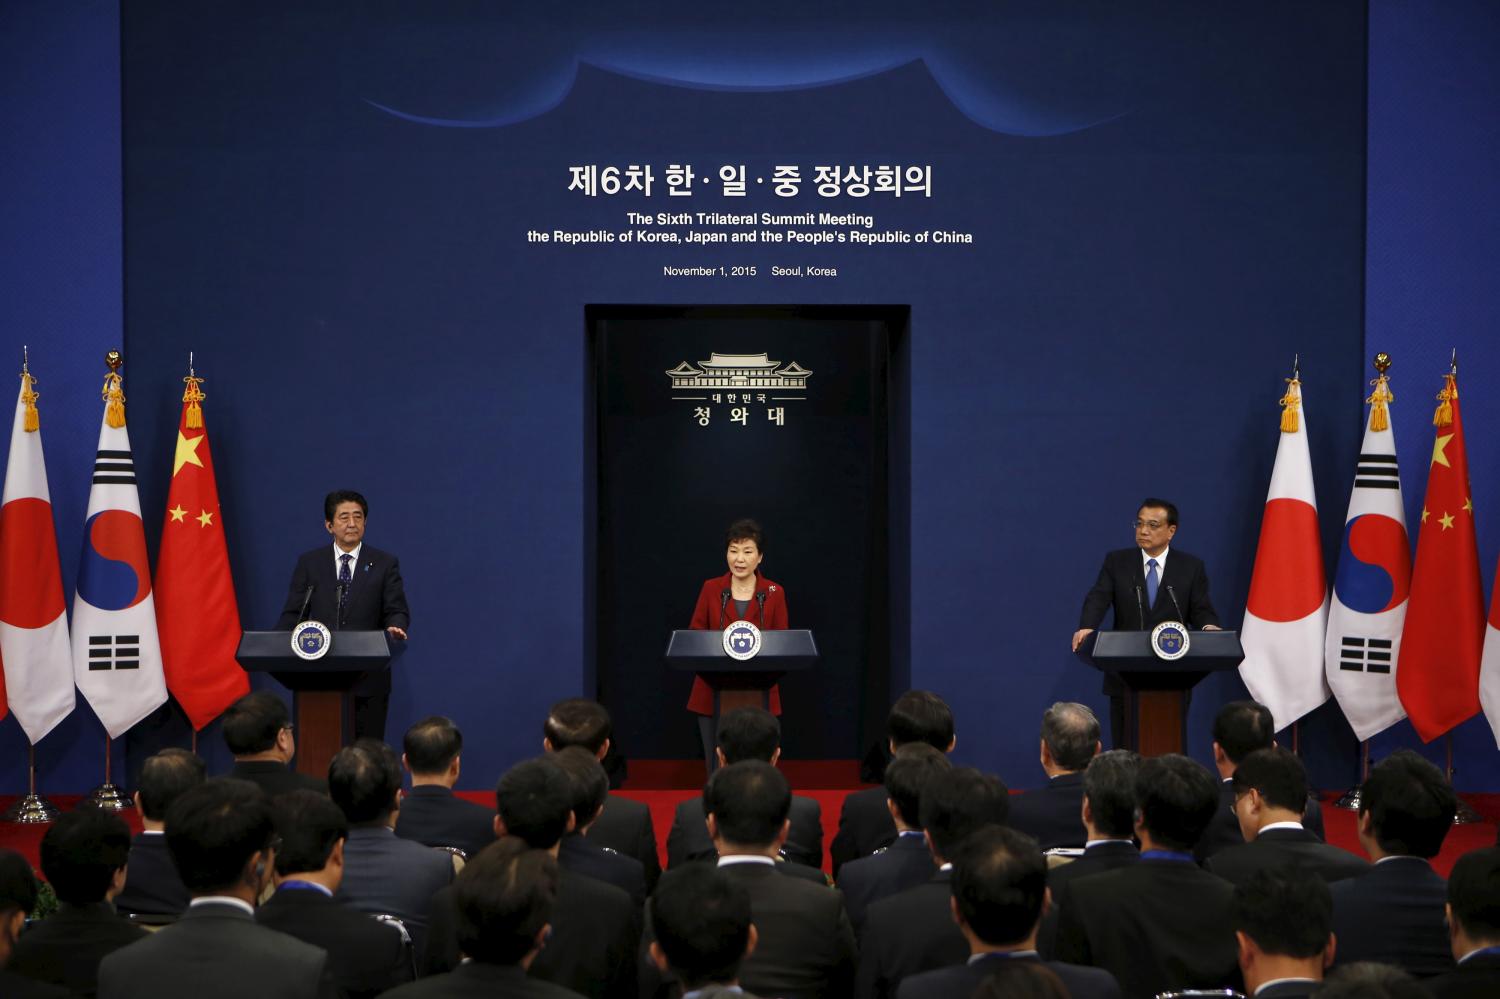 South Korean President Park Geun-hye (C) speaks besides Chinese Premier Li Keqiang (R) and Japanese Prime Minister Shinzo Abe during a news conference after a trilateral summit.